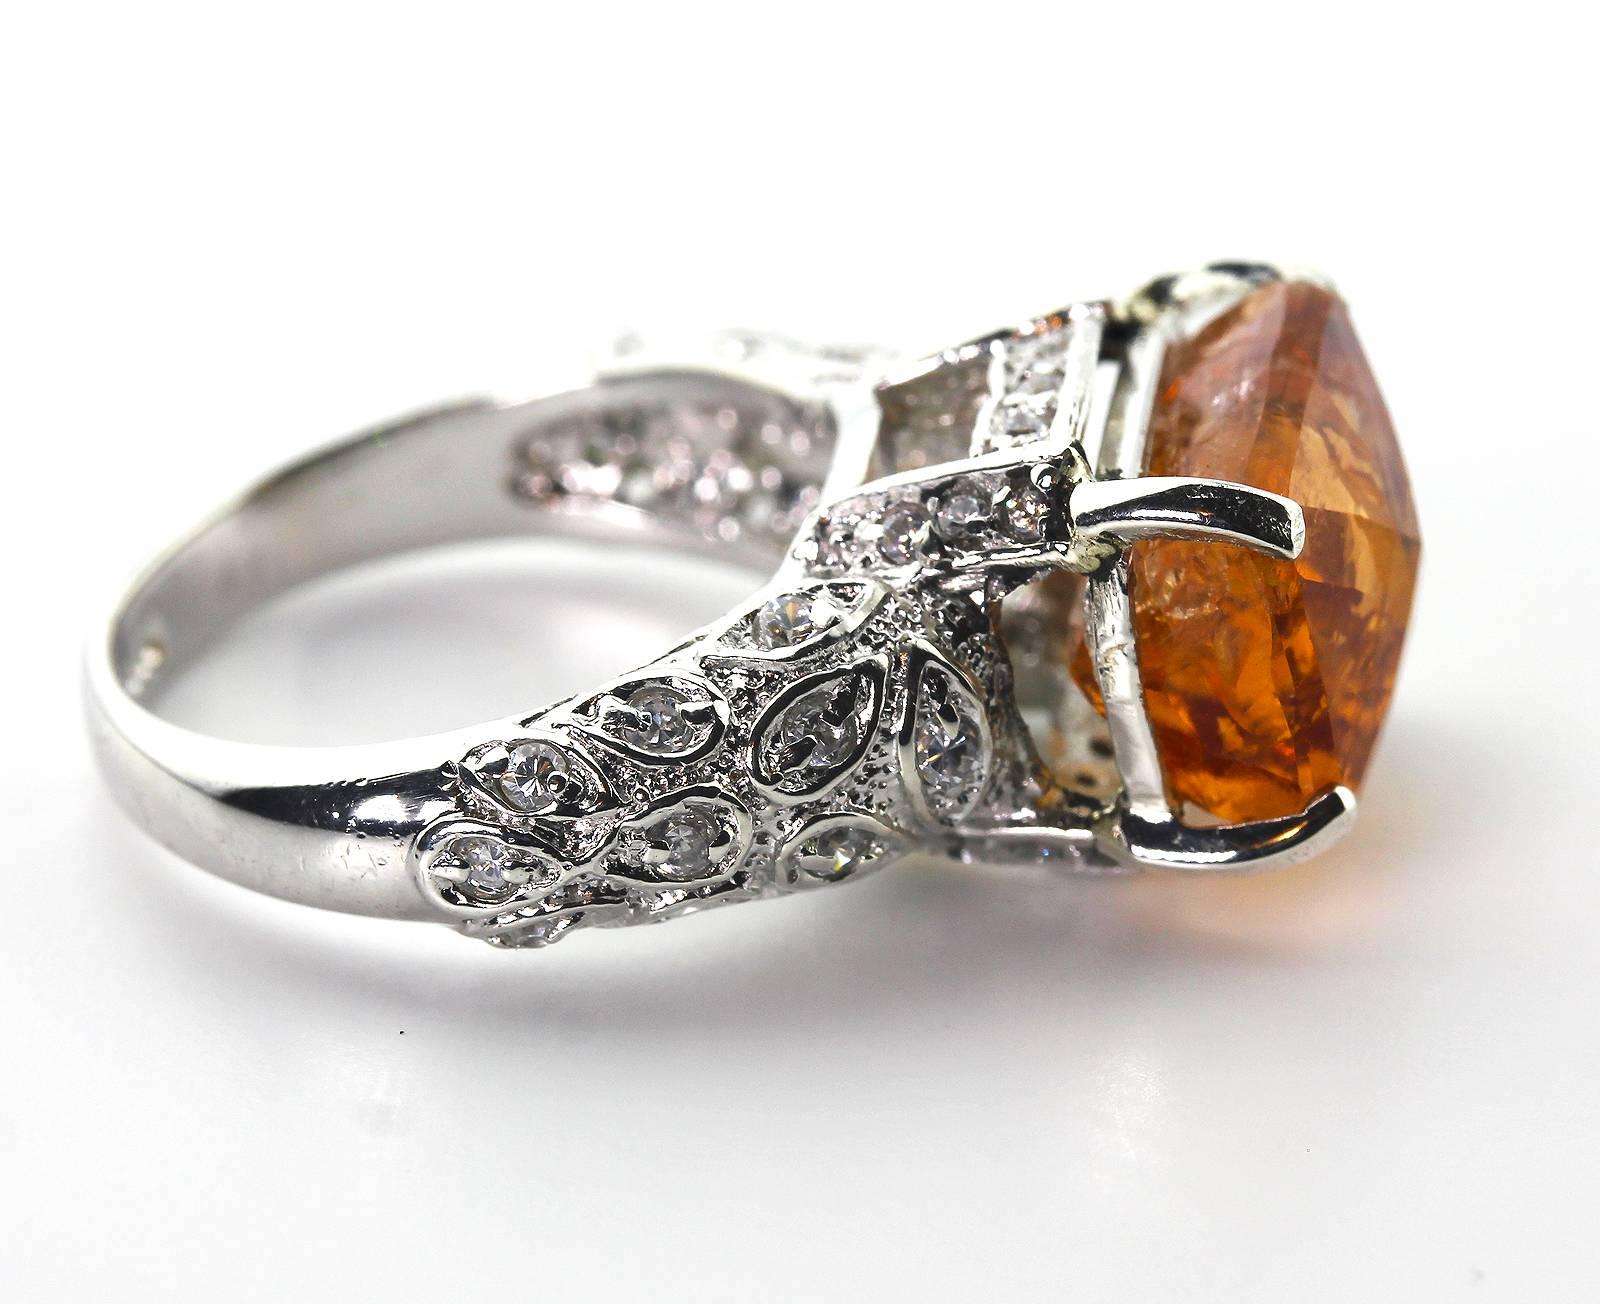 Women's AJD Spectacular RARE 9.47 Ct Imperial Topaz Antique Setting Silver Ring